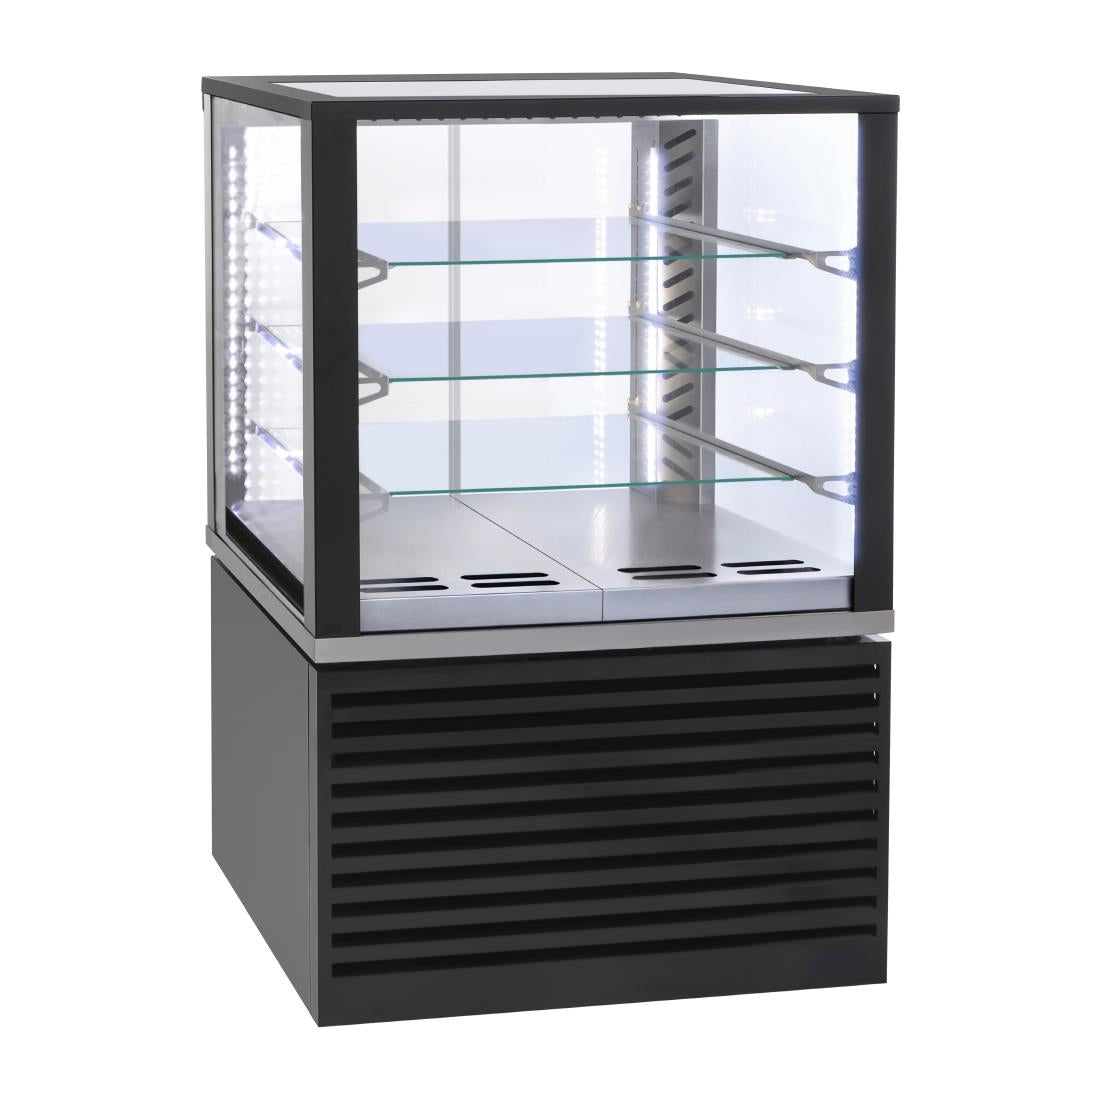 CH131 Roller Grill Panoramic Refrigerated Display Cabinet FSC800 Black JD Catering Equipment Solutions Ltd